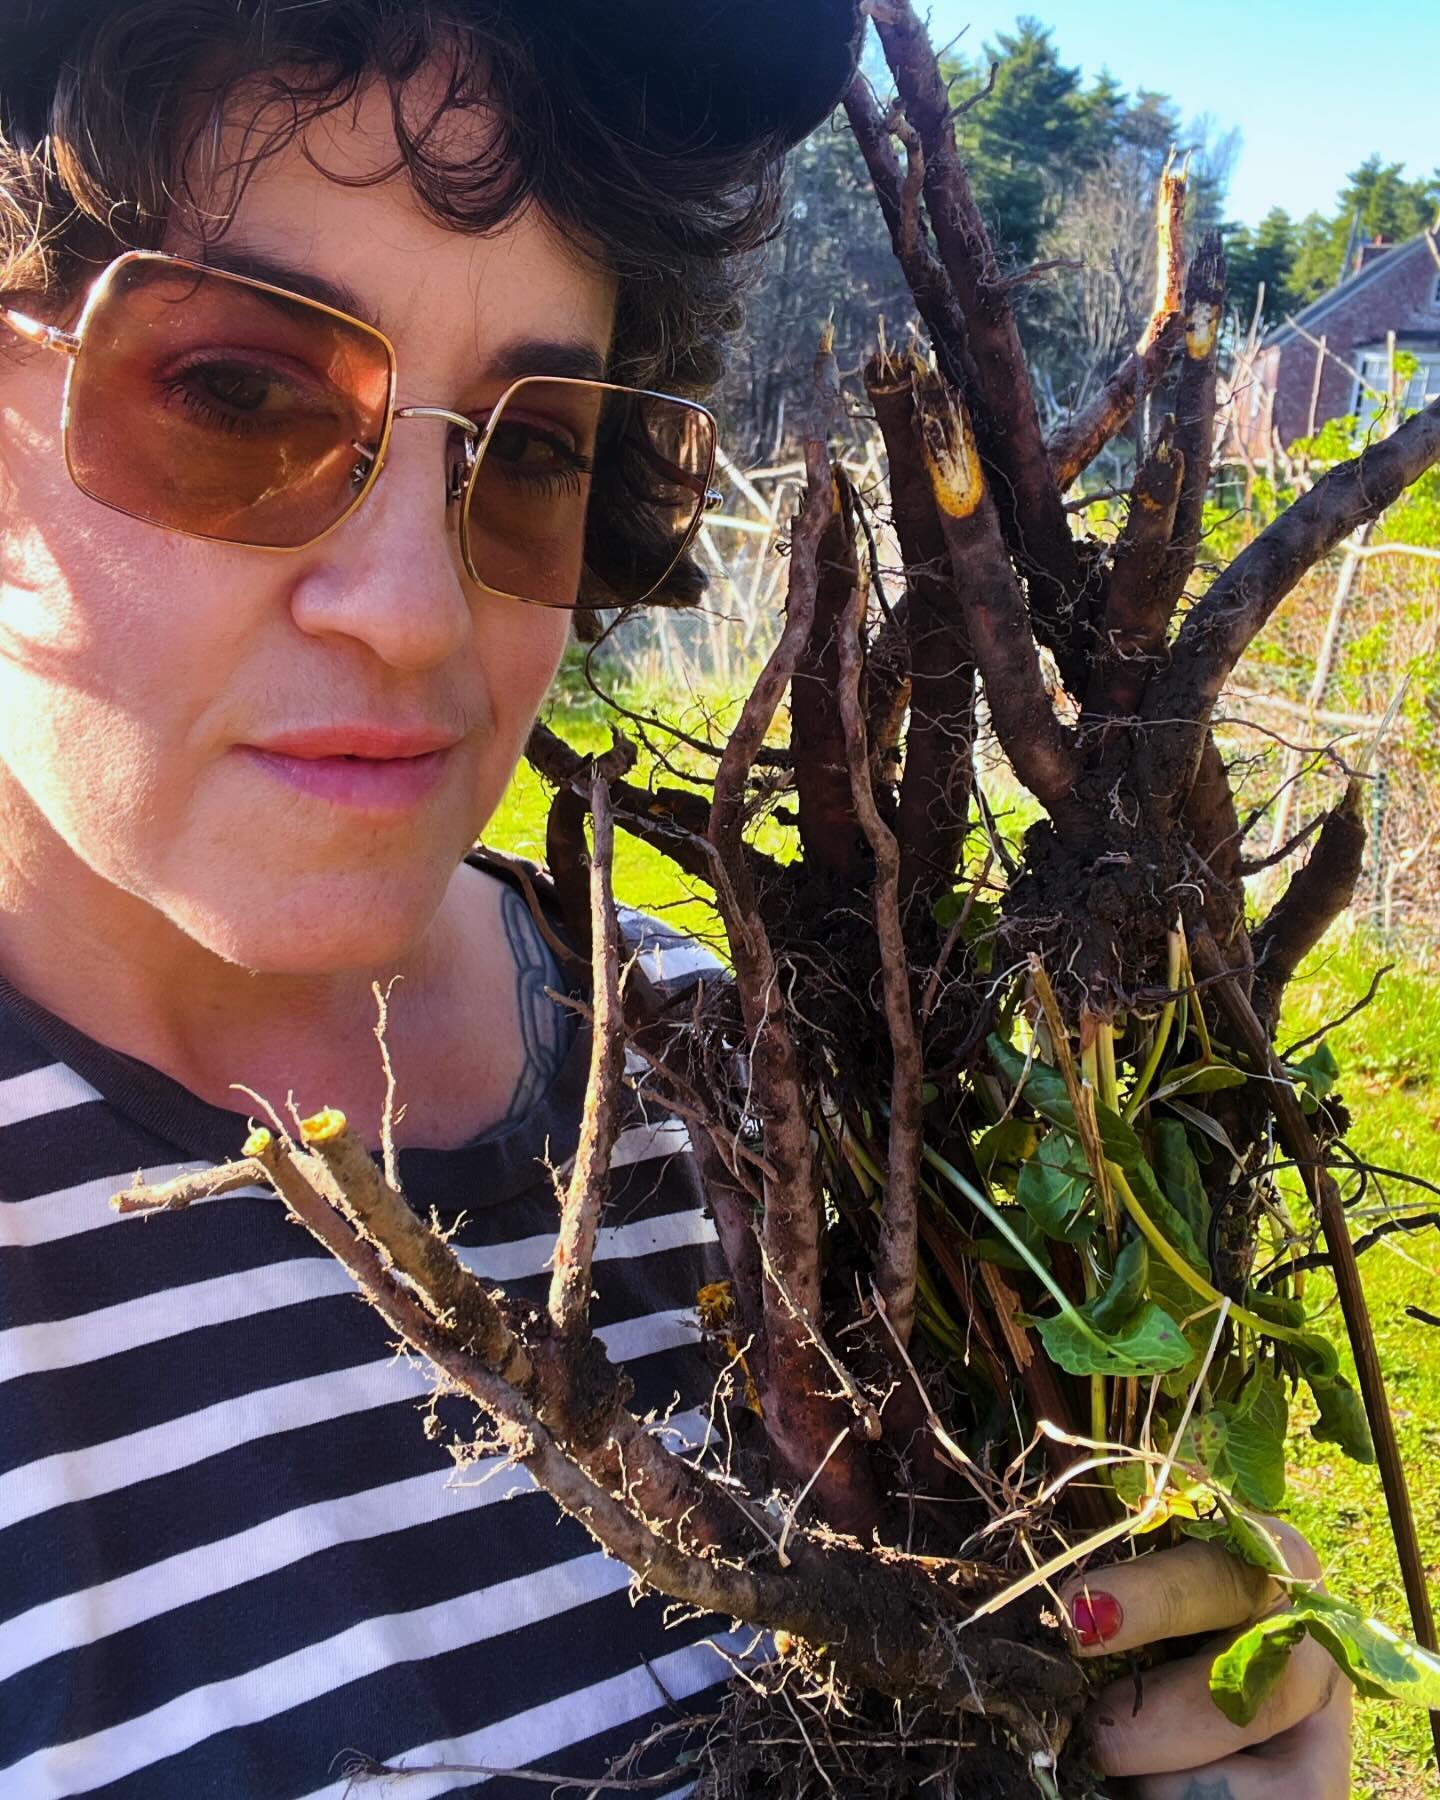 Selfie for proof of life&hellip;yellow dock roots proof of feeling alive! Something about digging medicine from the ground makes me feel full alive
.
.
.#plantmedicine #root #plantwitch